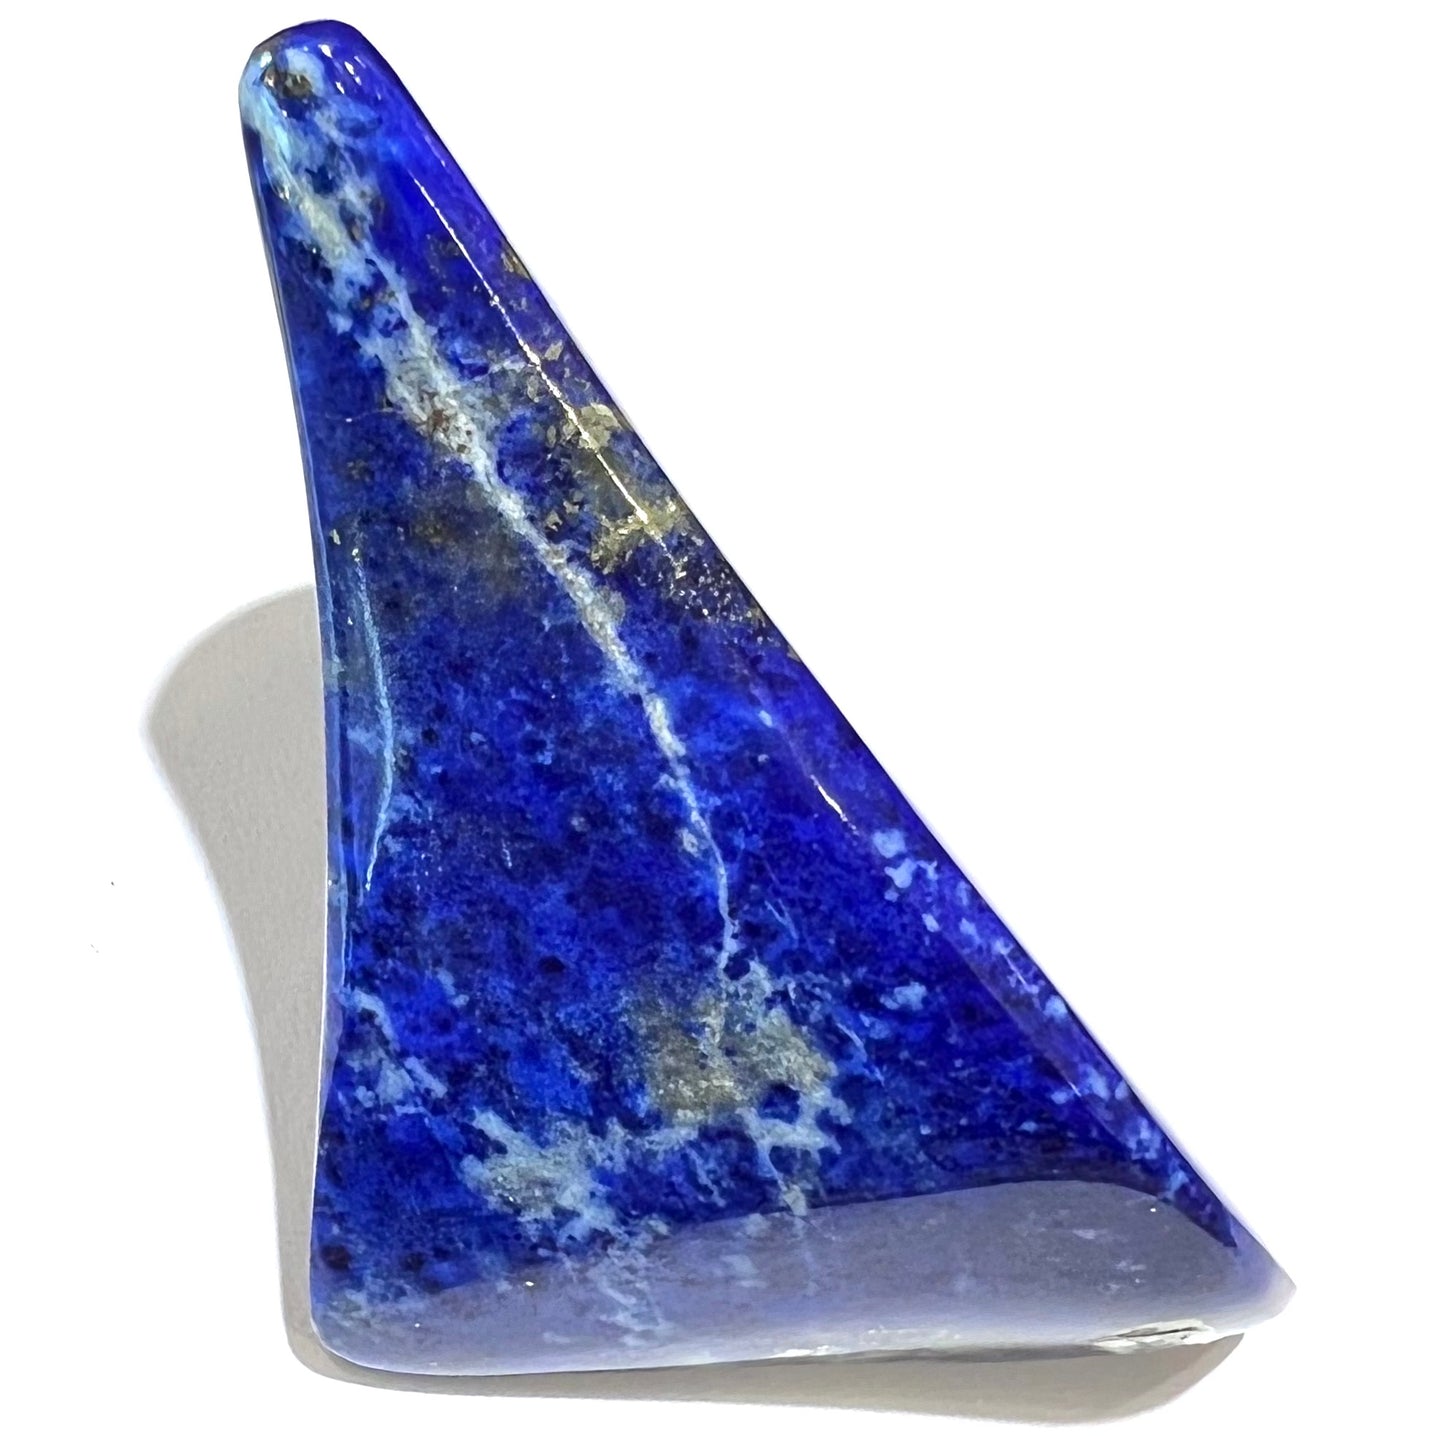 A loose polished sculpture made from royal blue lapis lazuli with golden pyrite inclusions.